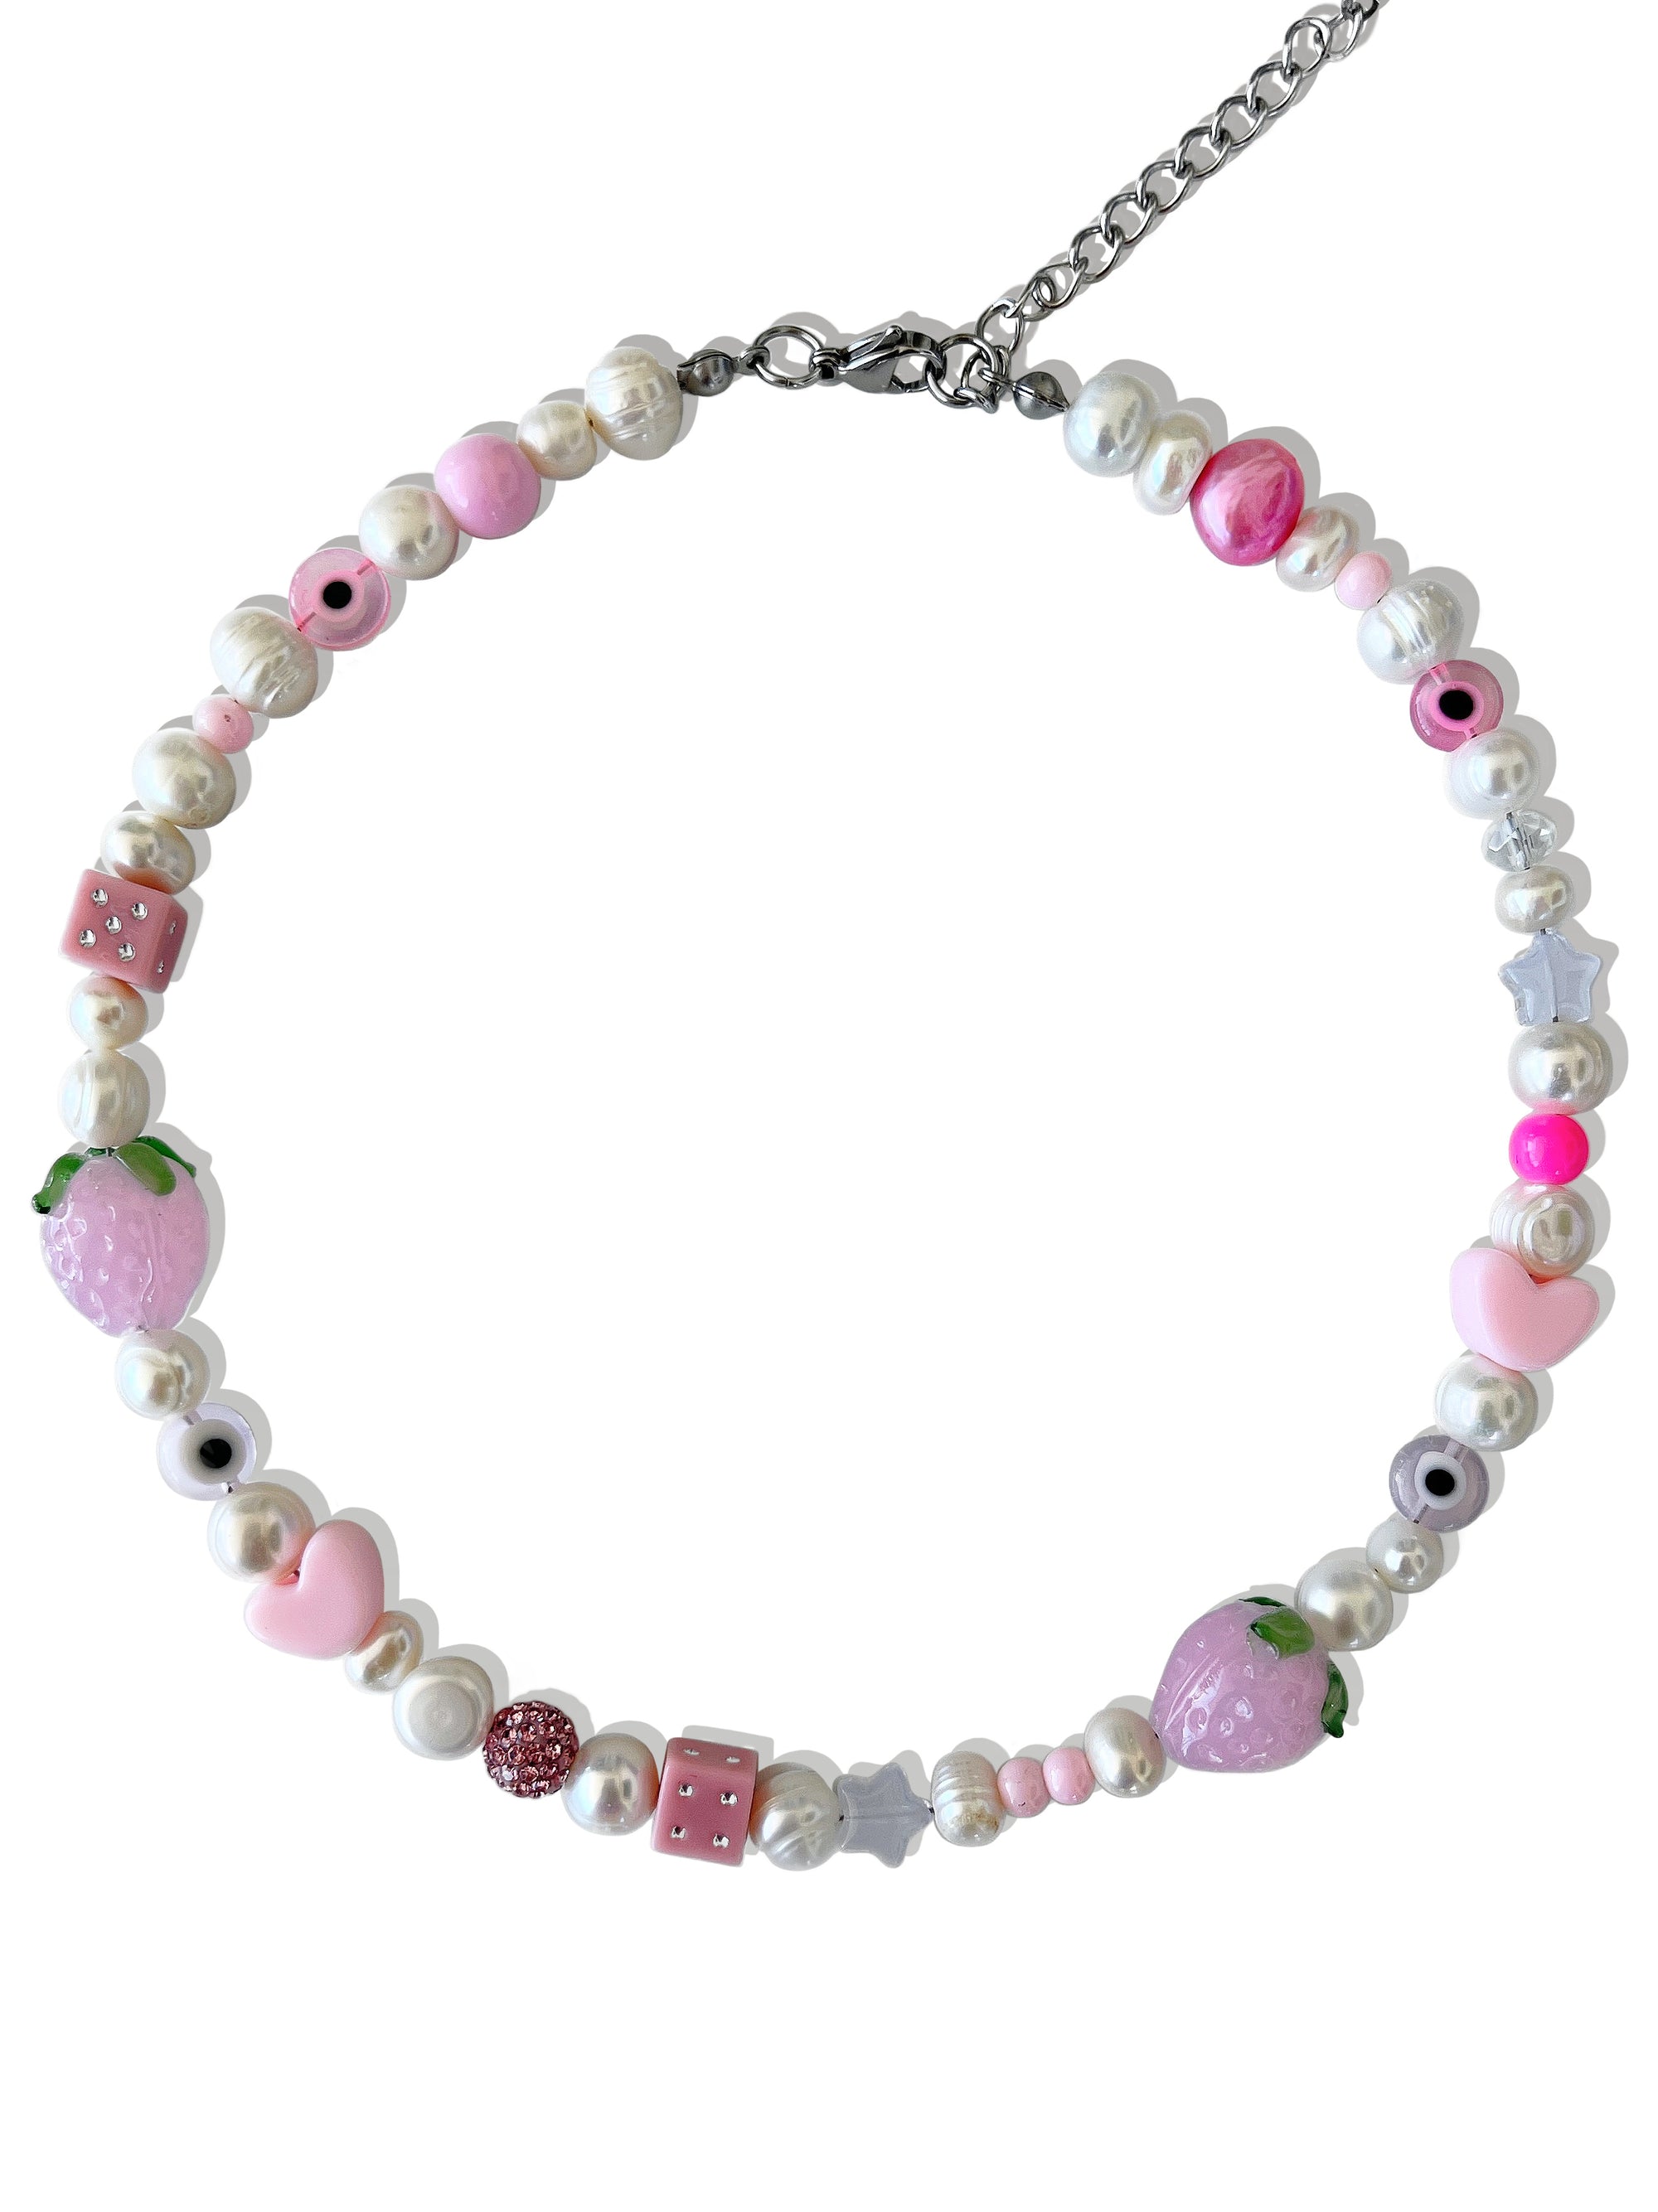 STRAWBERRY SWEETIE FRESHWATER PEARL NECKLACE